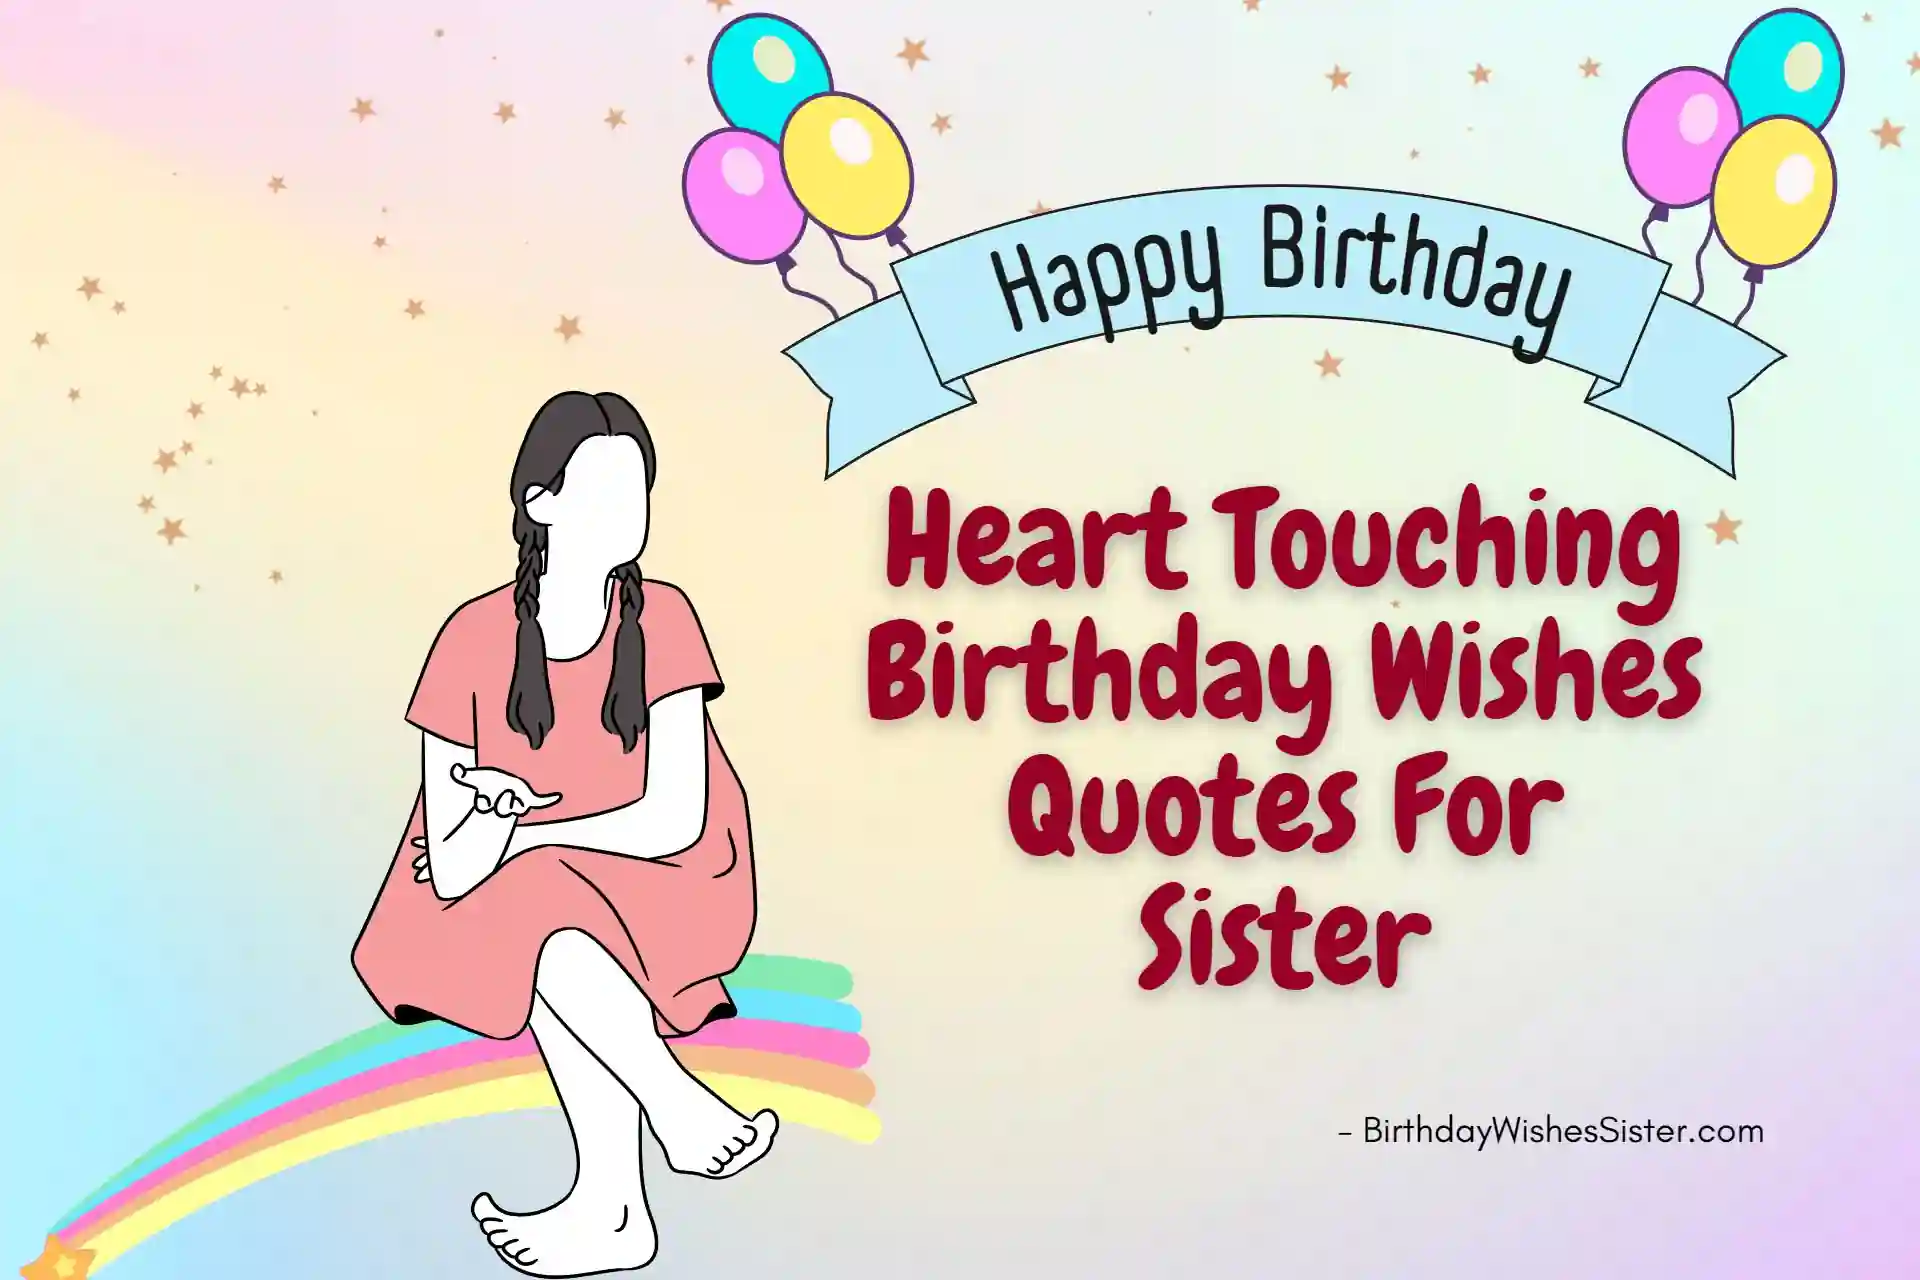 Heart Touching Birthday Wishes Quotes For Sister